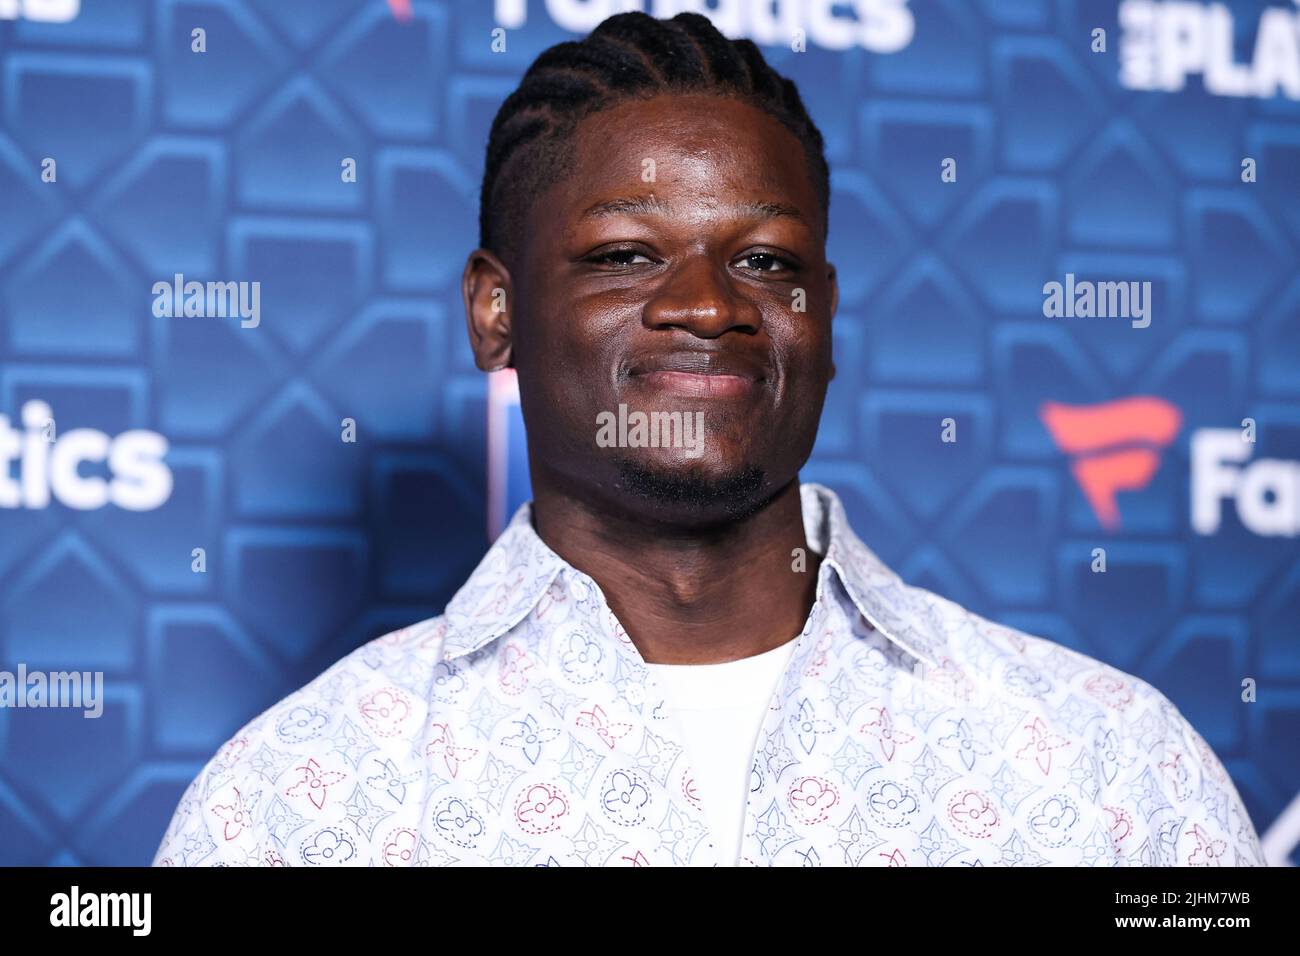 LOS ANGELES, CALIFORNIA, USA - JULY 18: Mo Bamba arrives at The 'Players Party' 2022 Co-Hosted By Michael Rubin, MLBPA And Fanatics held at the City Market Social House on July 18, 2022 in Los Angeles, California, United States. (Photo by Xavier Collin/Image Press Agency) Stock Photo